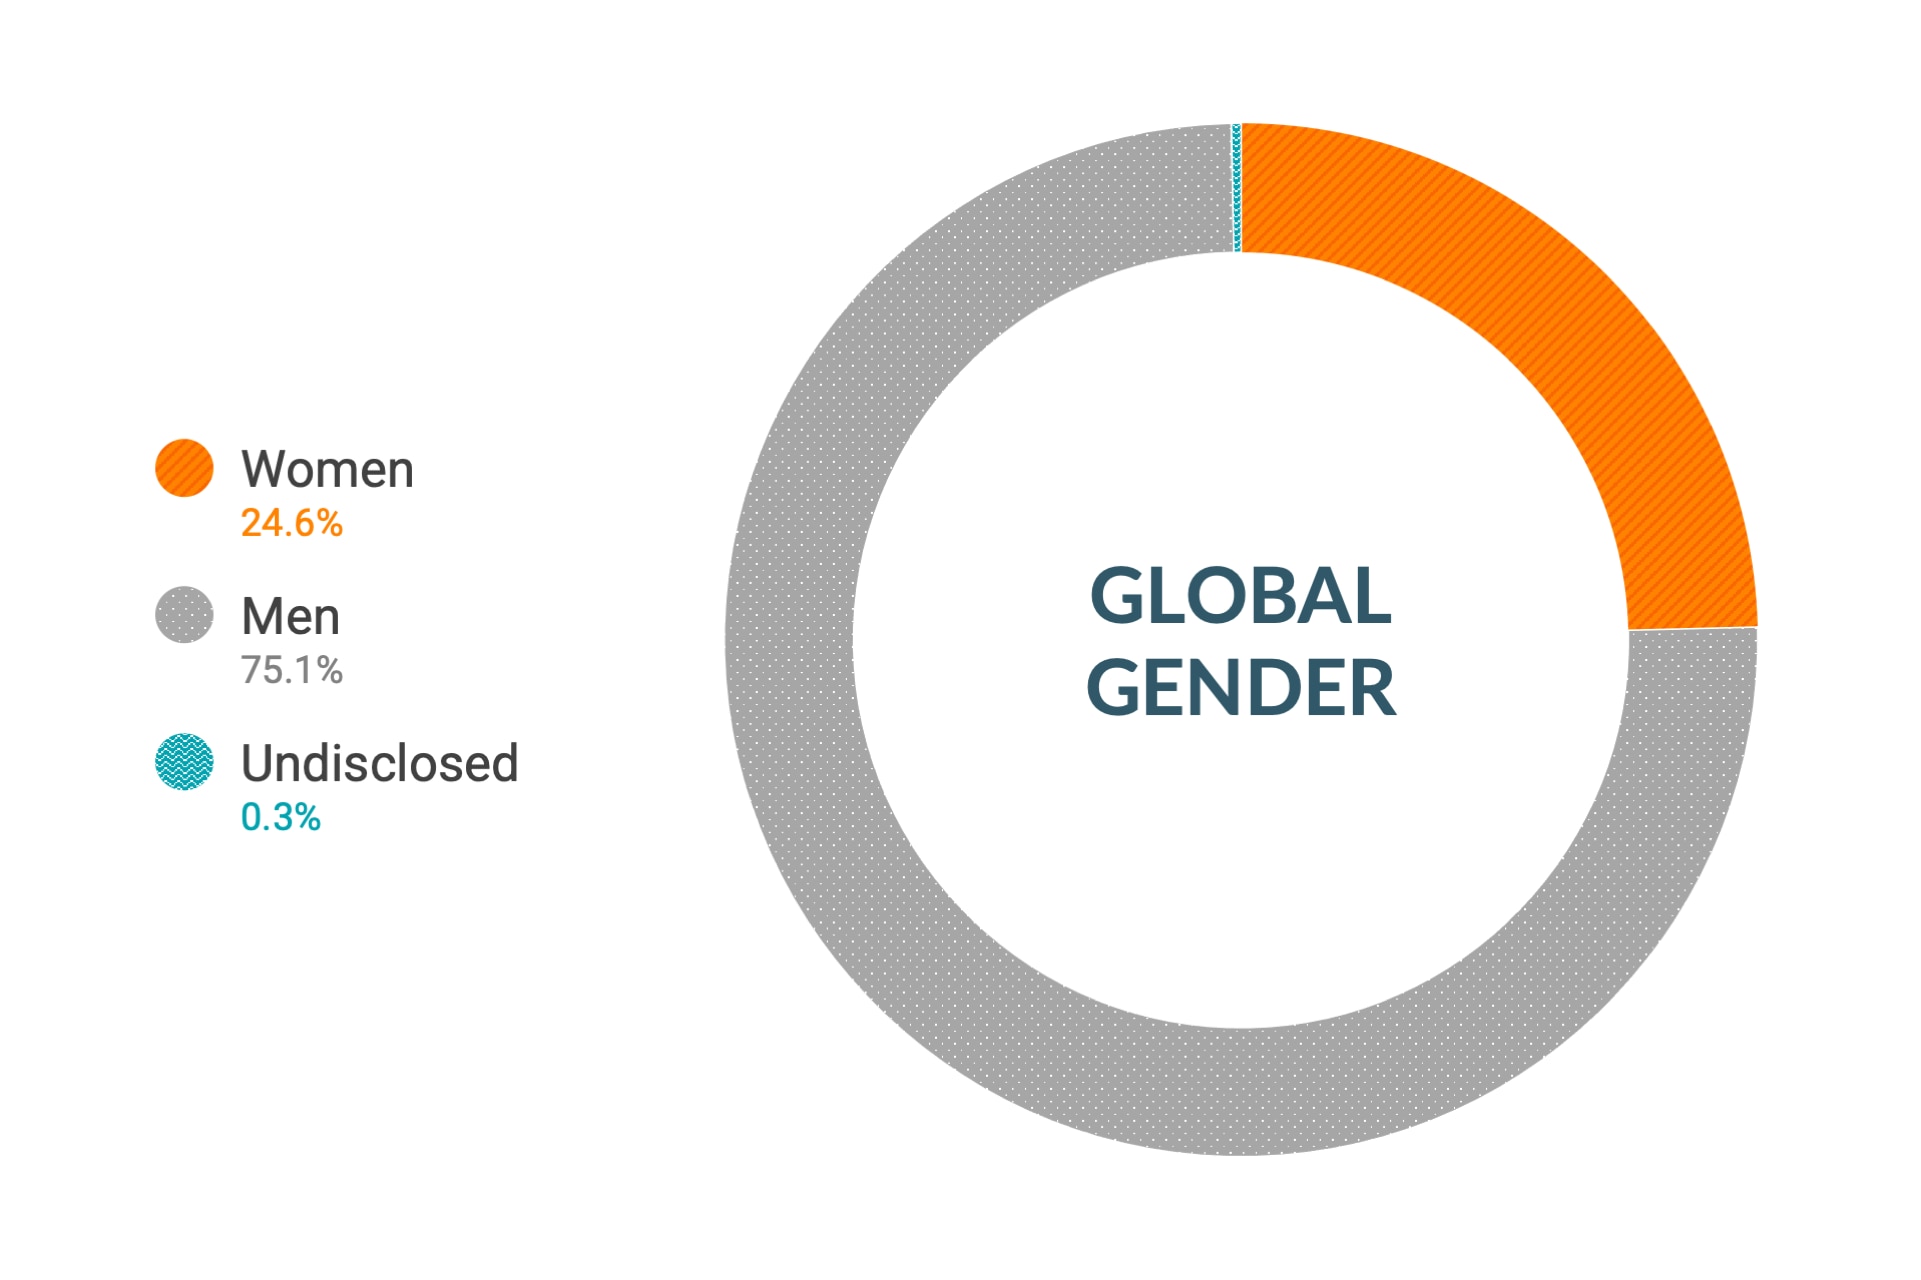 Cloudera Diversity and Inclusion data for Global Gender: Women 25.8%, Men 73.9%, 0.3% Undisclosed